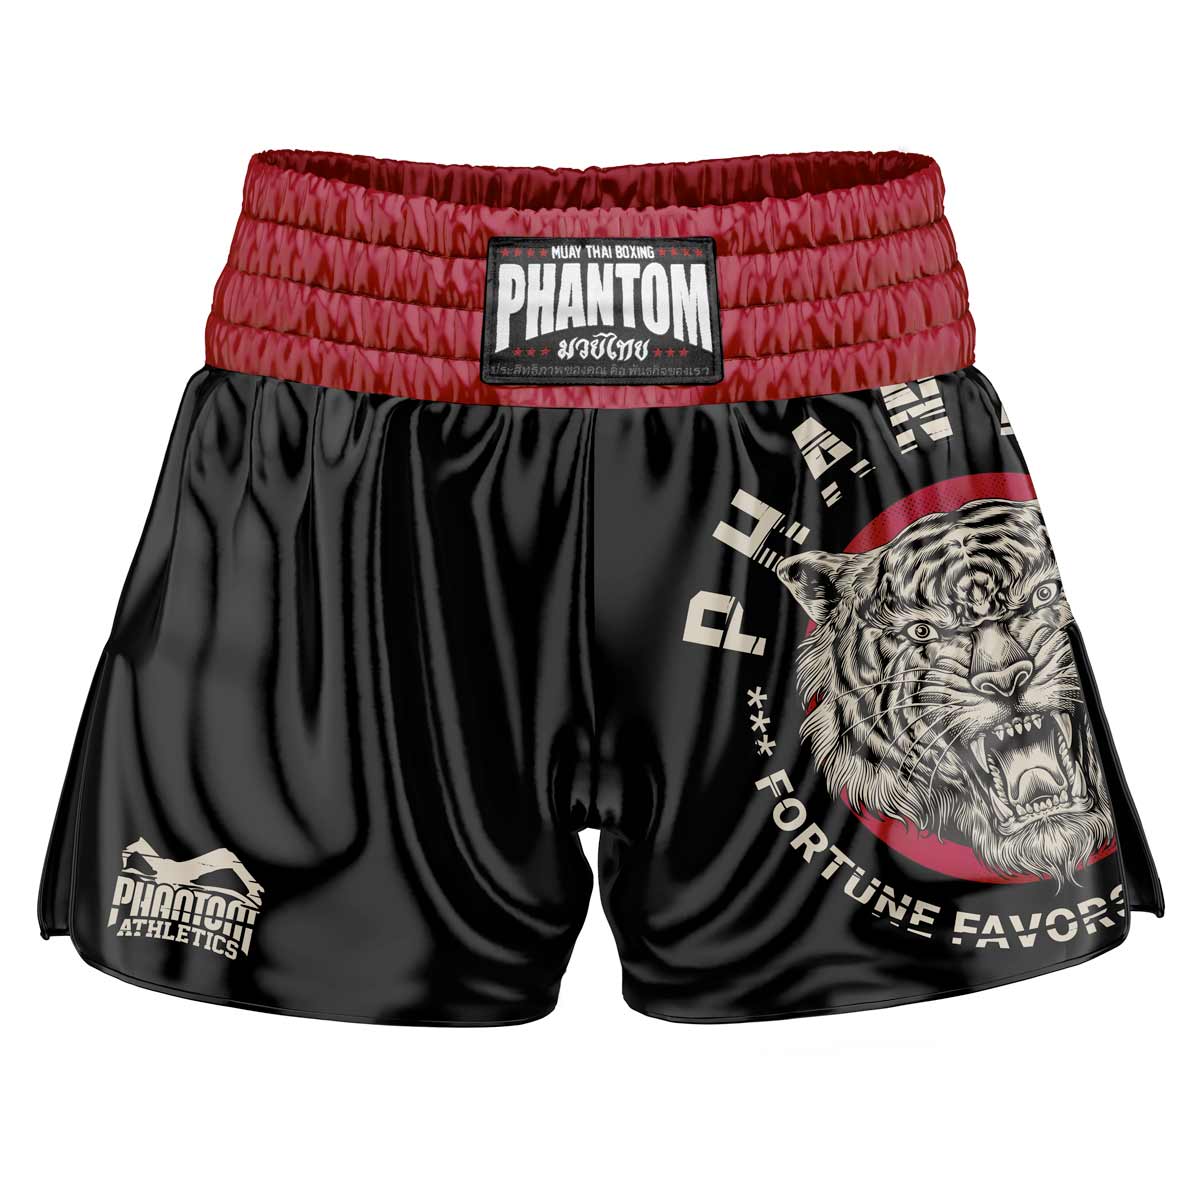 The Phantom Muay Thai shorts in black. Old school satin fabric and our popular Tiger Unit design gives you an original Thailand feeling. In the usual Phantom Athletics quality. Ideal for your Thai boxing training and competition.